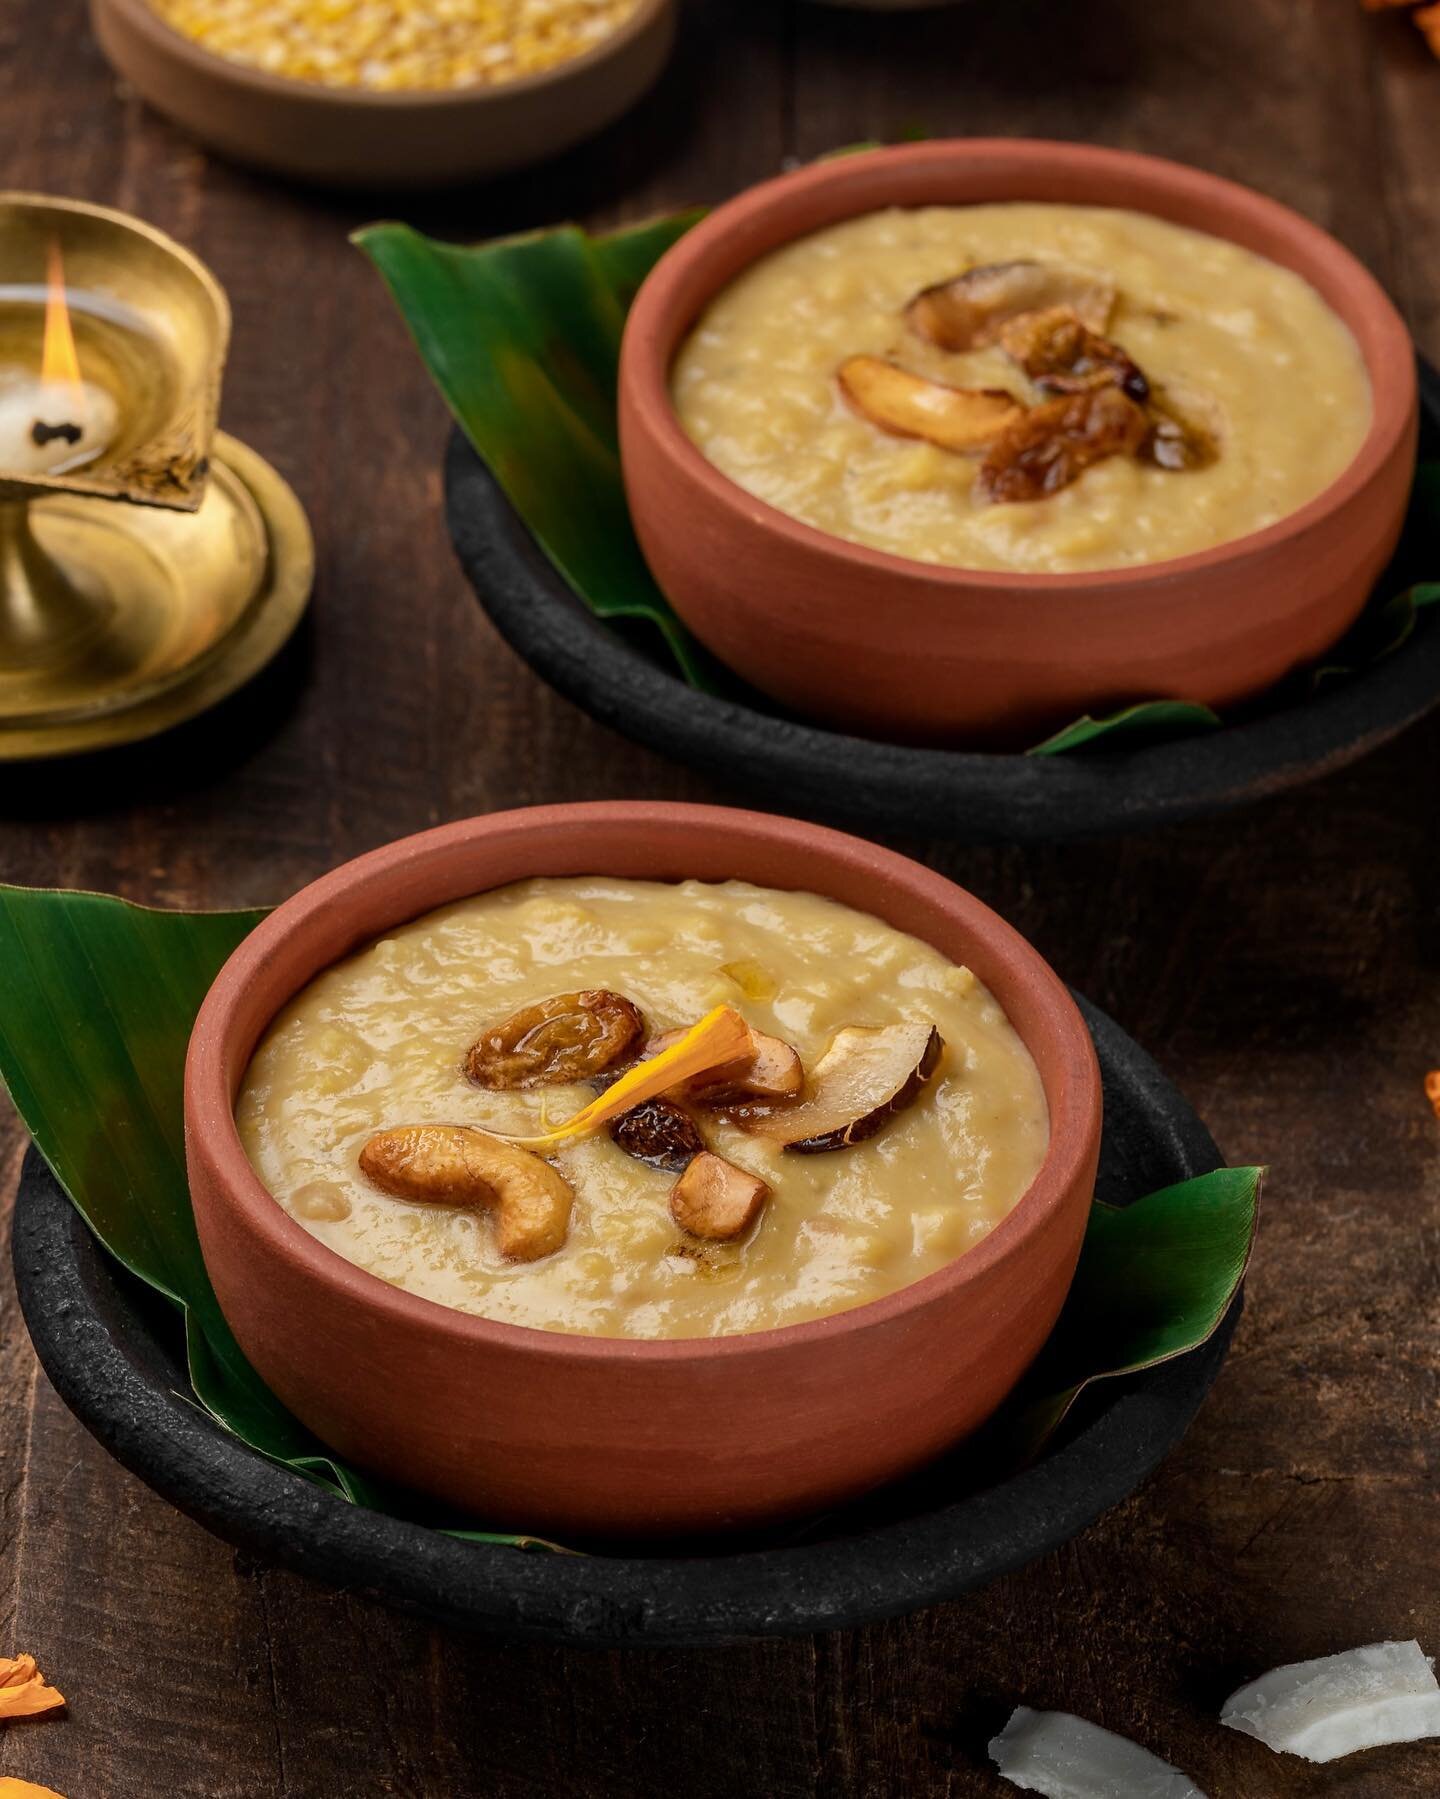 No Kerala sadya is complete without payasam. The recipe for MUNG DAL PAYASAM (Parippu Payasam) is new on the blog (link in profile). Made with split yellow lentils, jaggery and coconut milk, this sweet lentil pudding is rich, creamy and delicious. Th